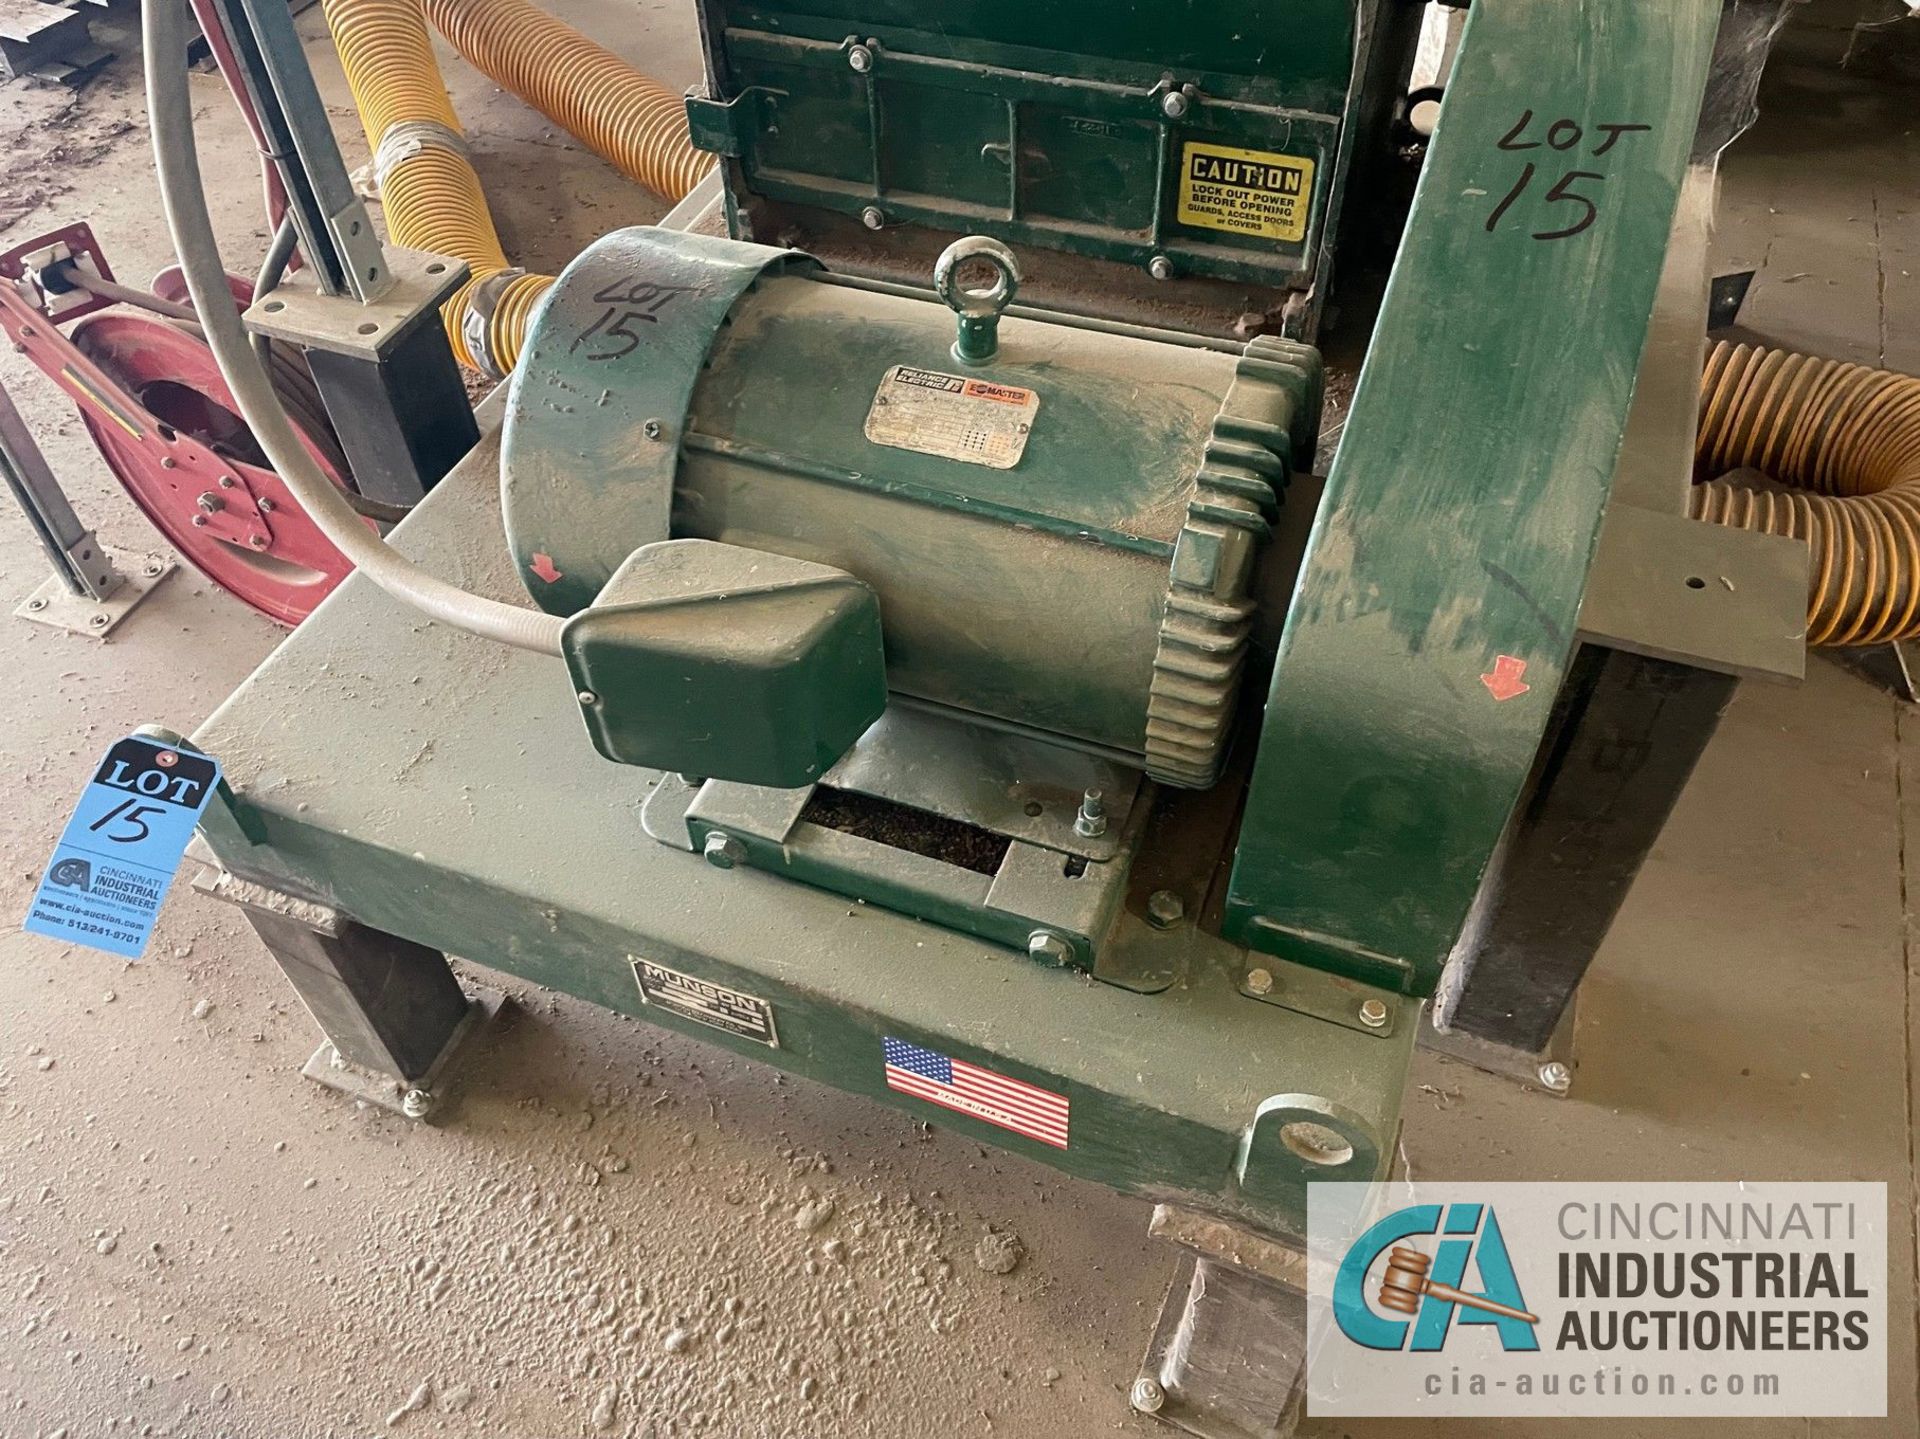 20-HP MUNSON SIZE 4 CUTTER HAMMER MILL; S/N 180897, DURA PULSE V/S DRIVE, DISCONNECT SWITCH, HEAVY - Image 6 of 11